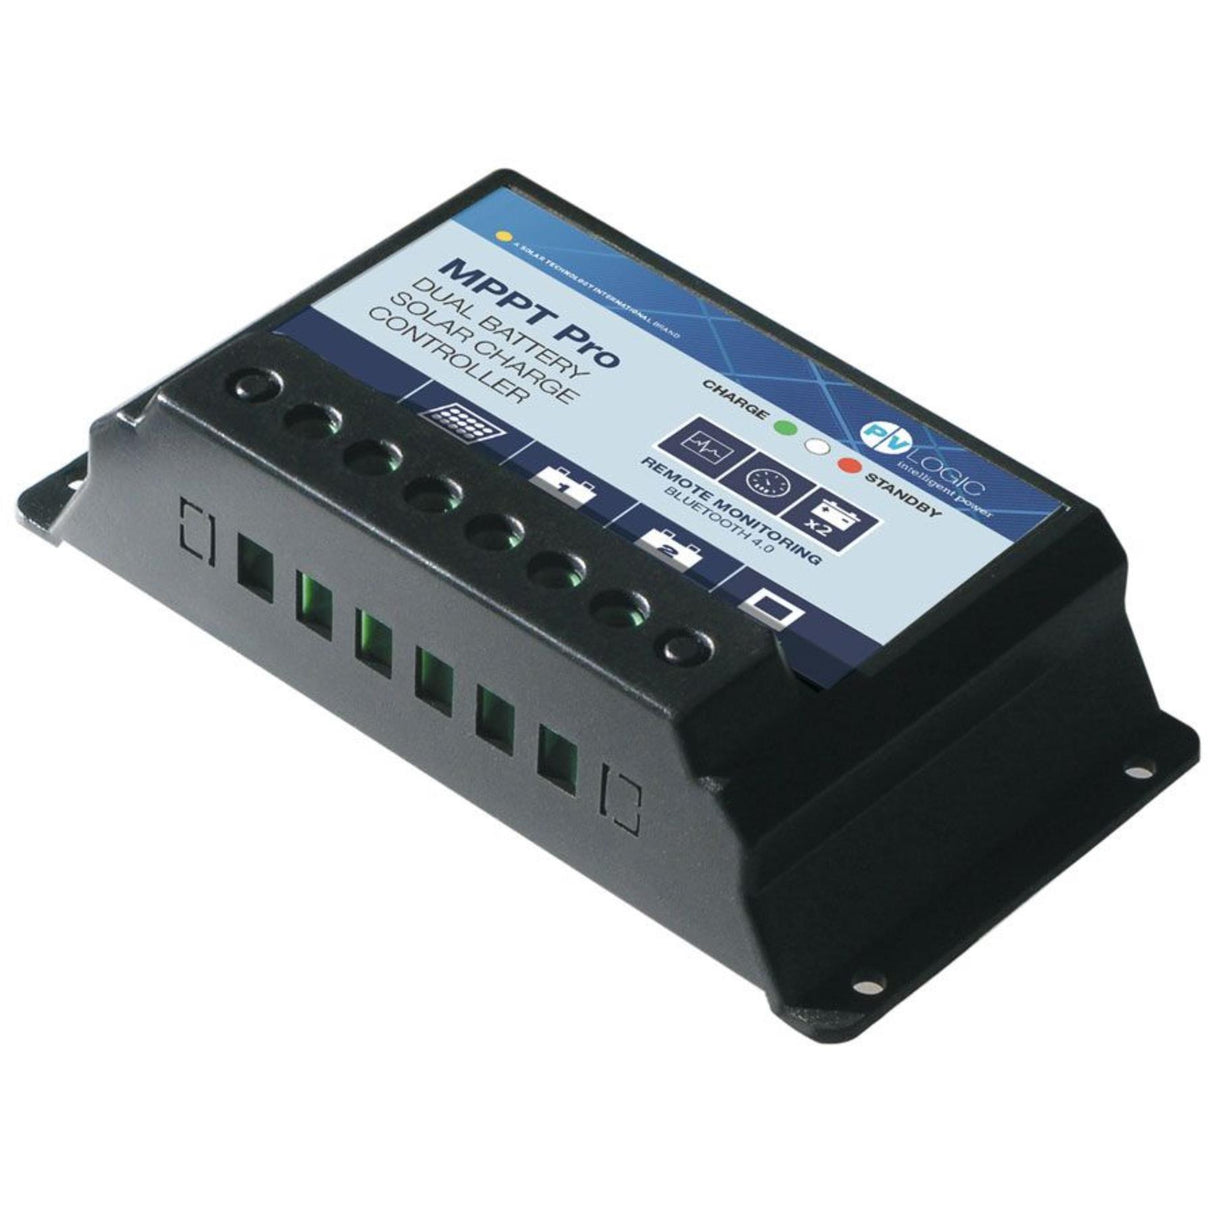 Solar Technology 15A MPPT Dual Battery Charge Controller